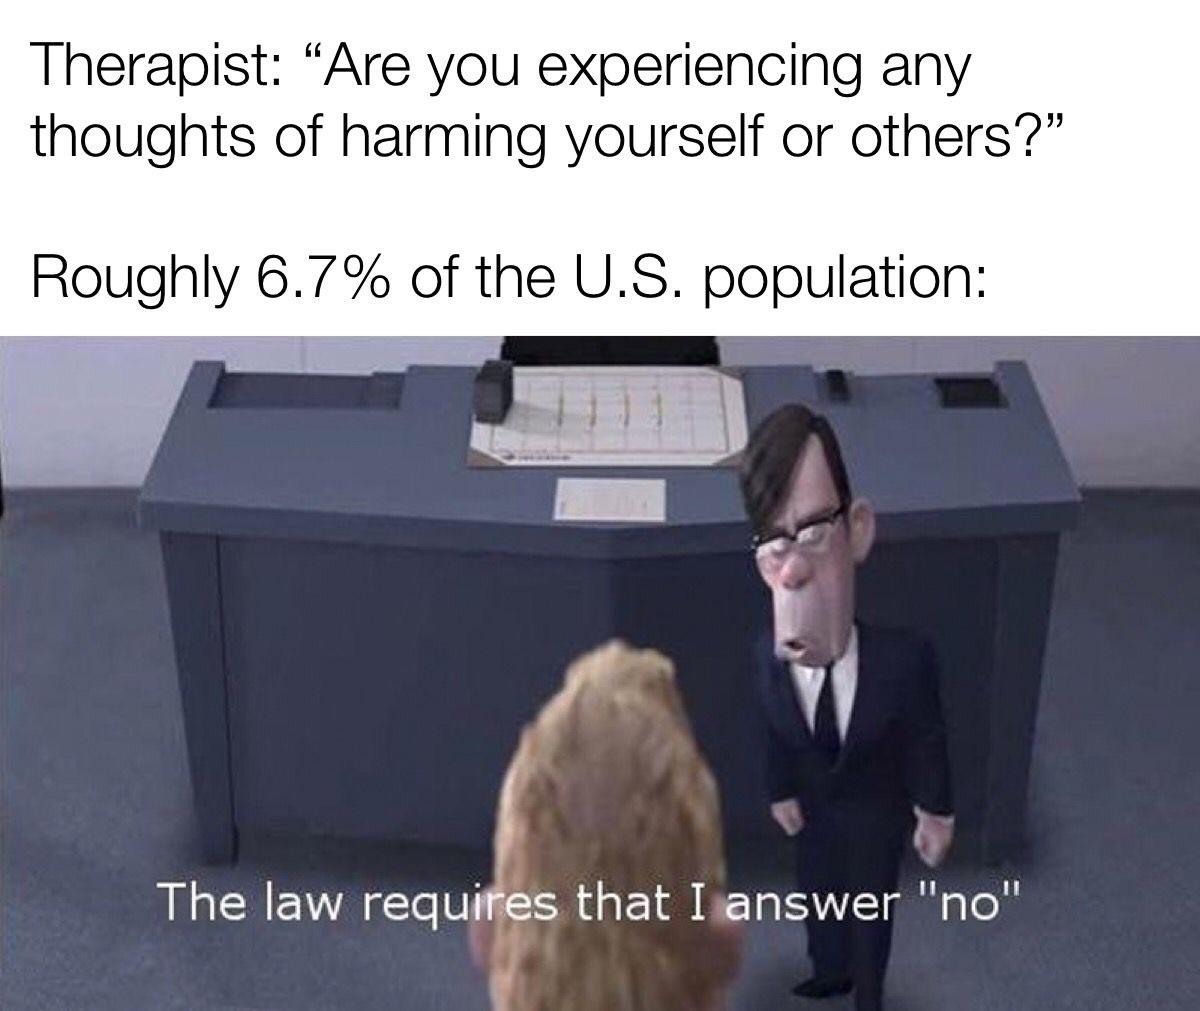 law requires that i answer no - Therapist Are you experiencing any thoughts of harming yourself or others? Roughly 6.7% of the U.S. population The law requires that I answer "no"